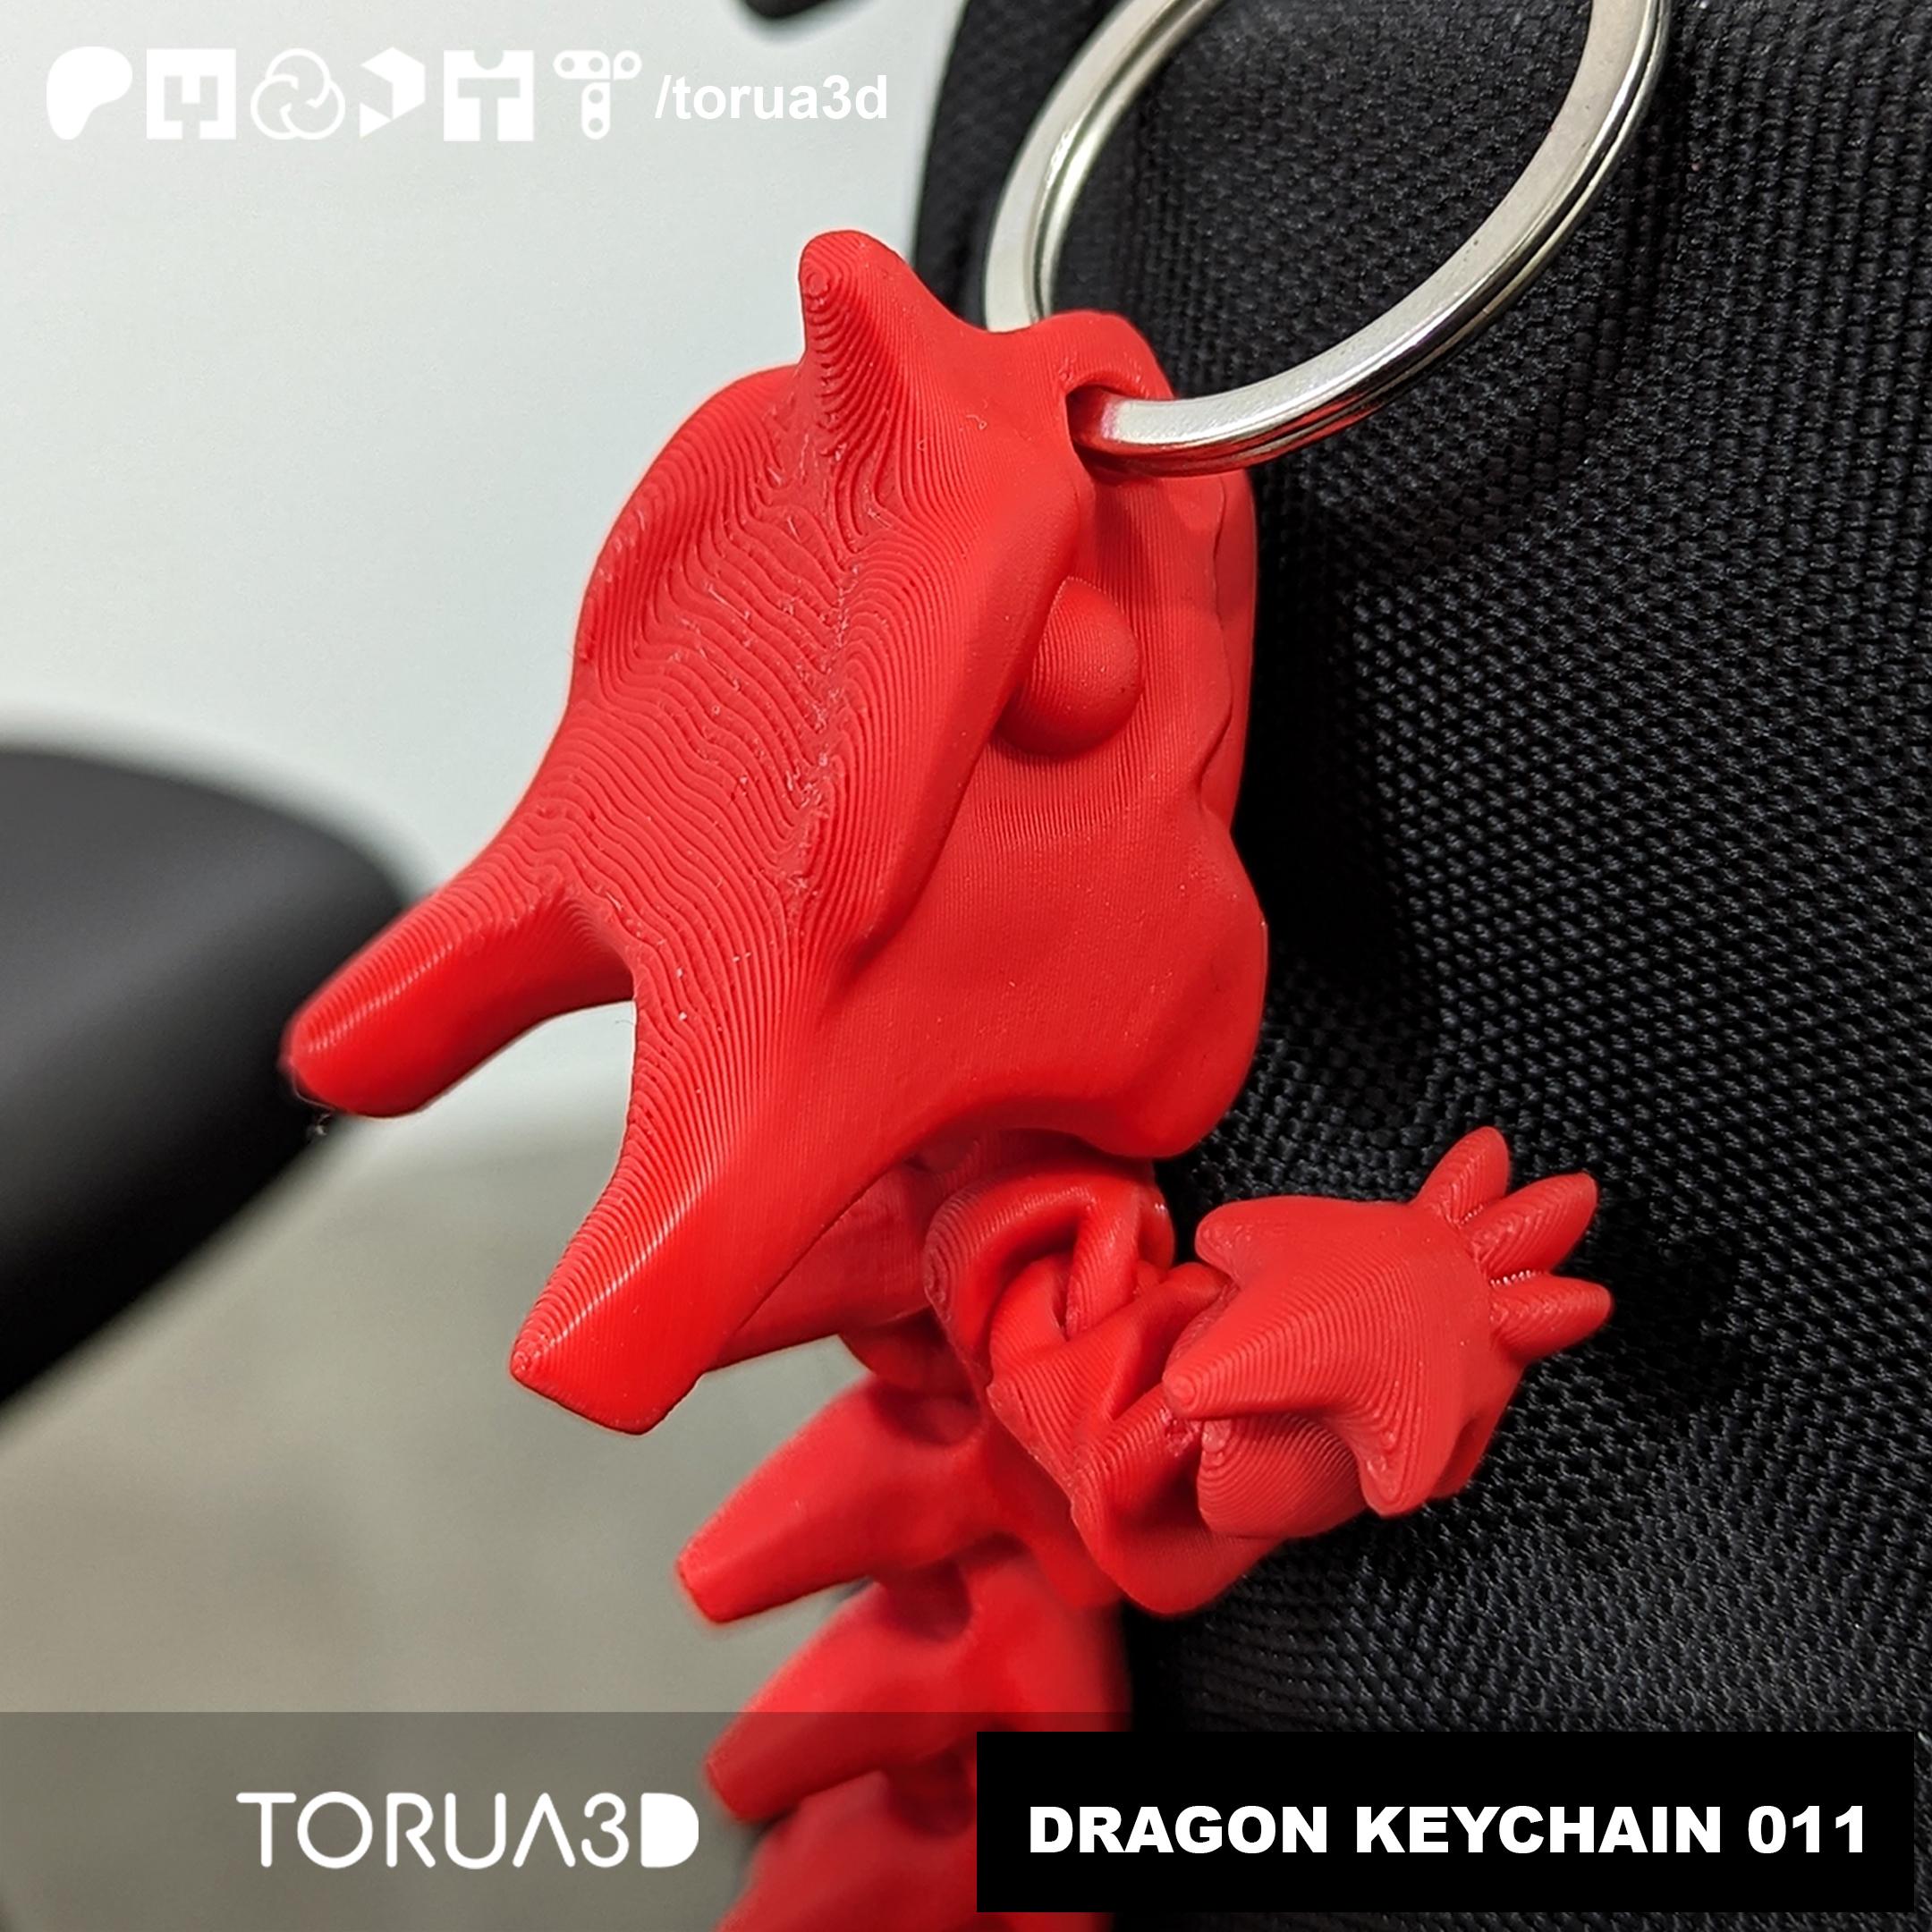 Articulated Dragon Keychain 011 - Print in place - No supports 3d model